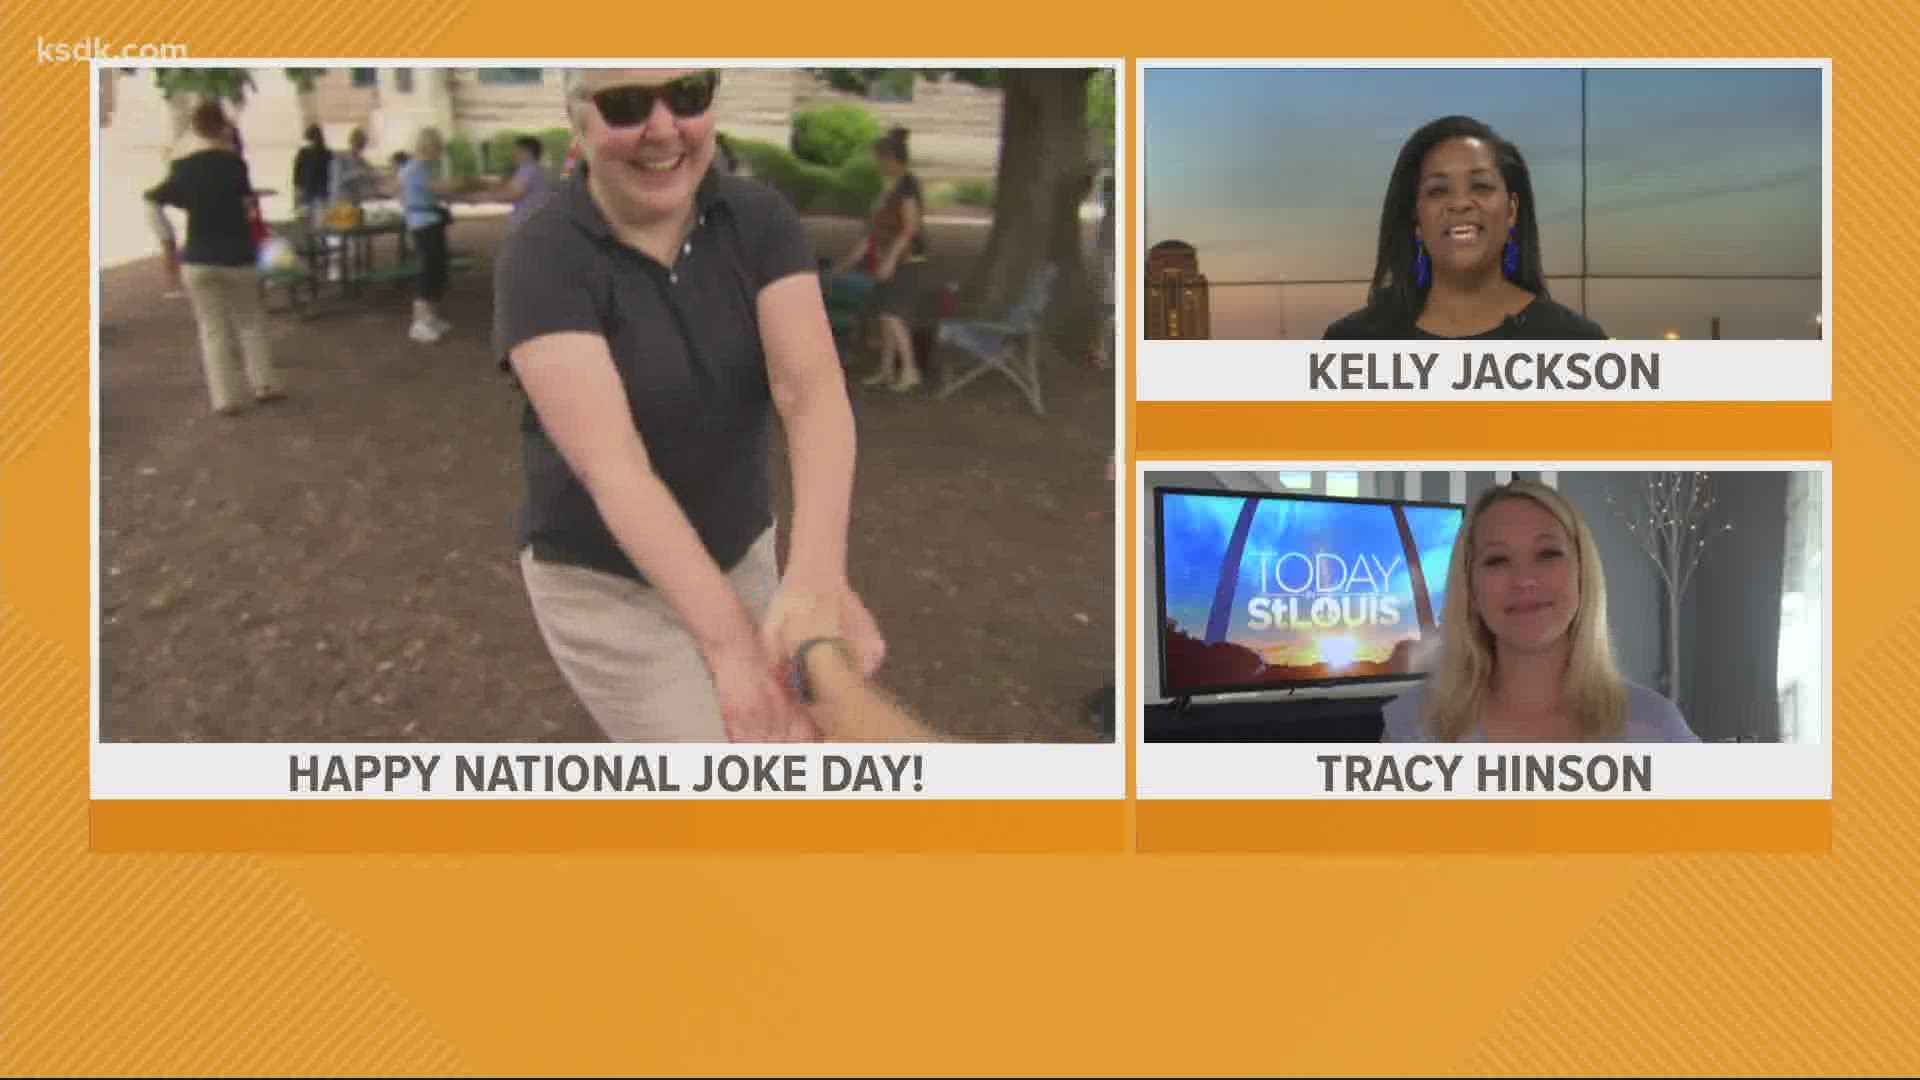 Tracy Hinson and Kelly Jackson shares their best jokes for National Joke Day